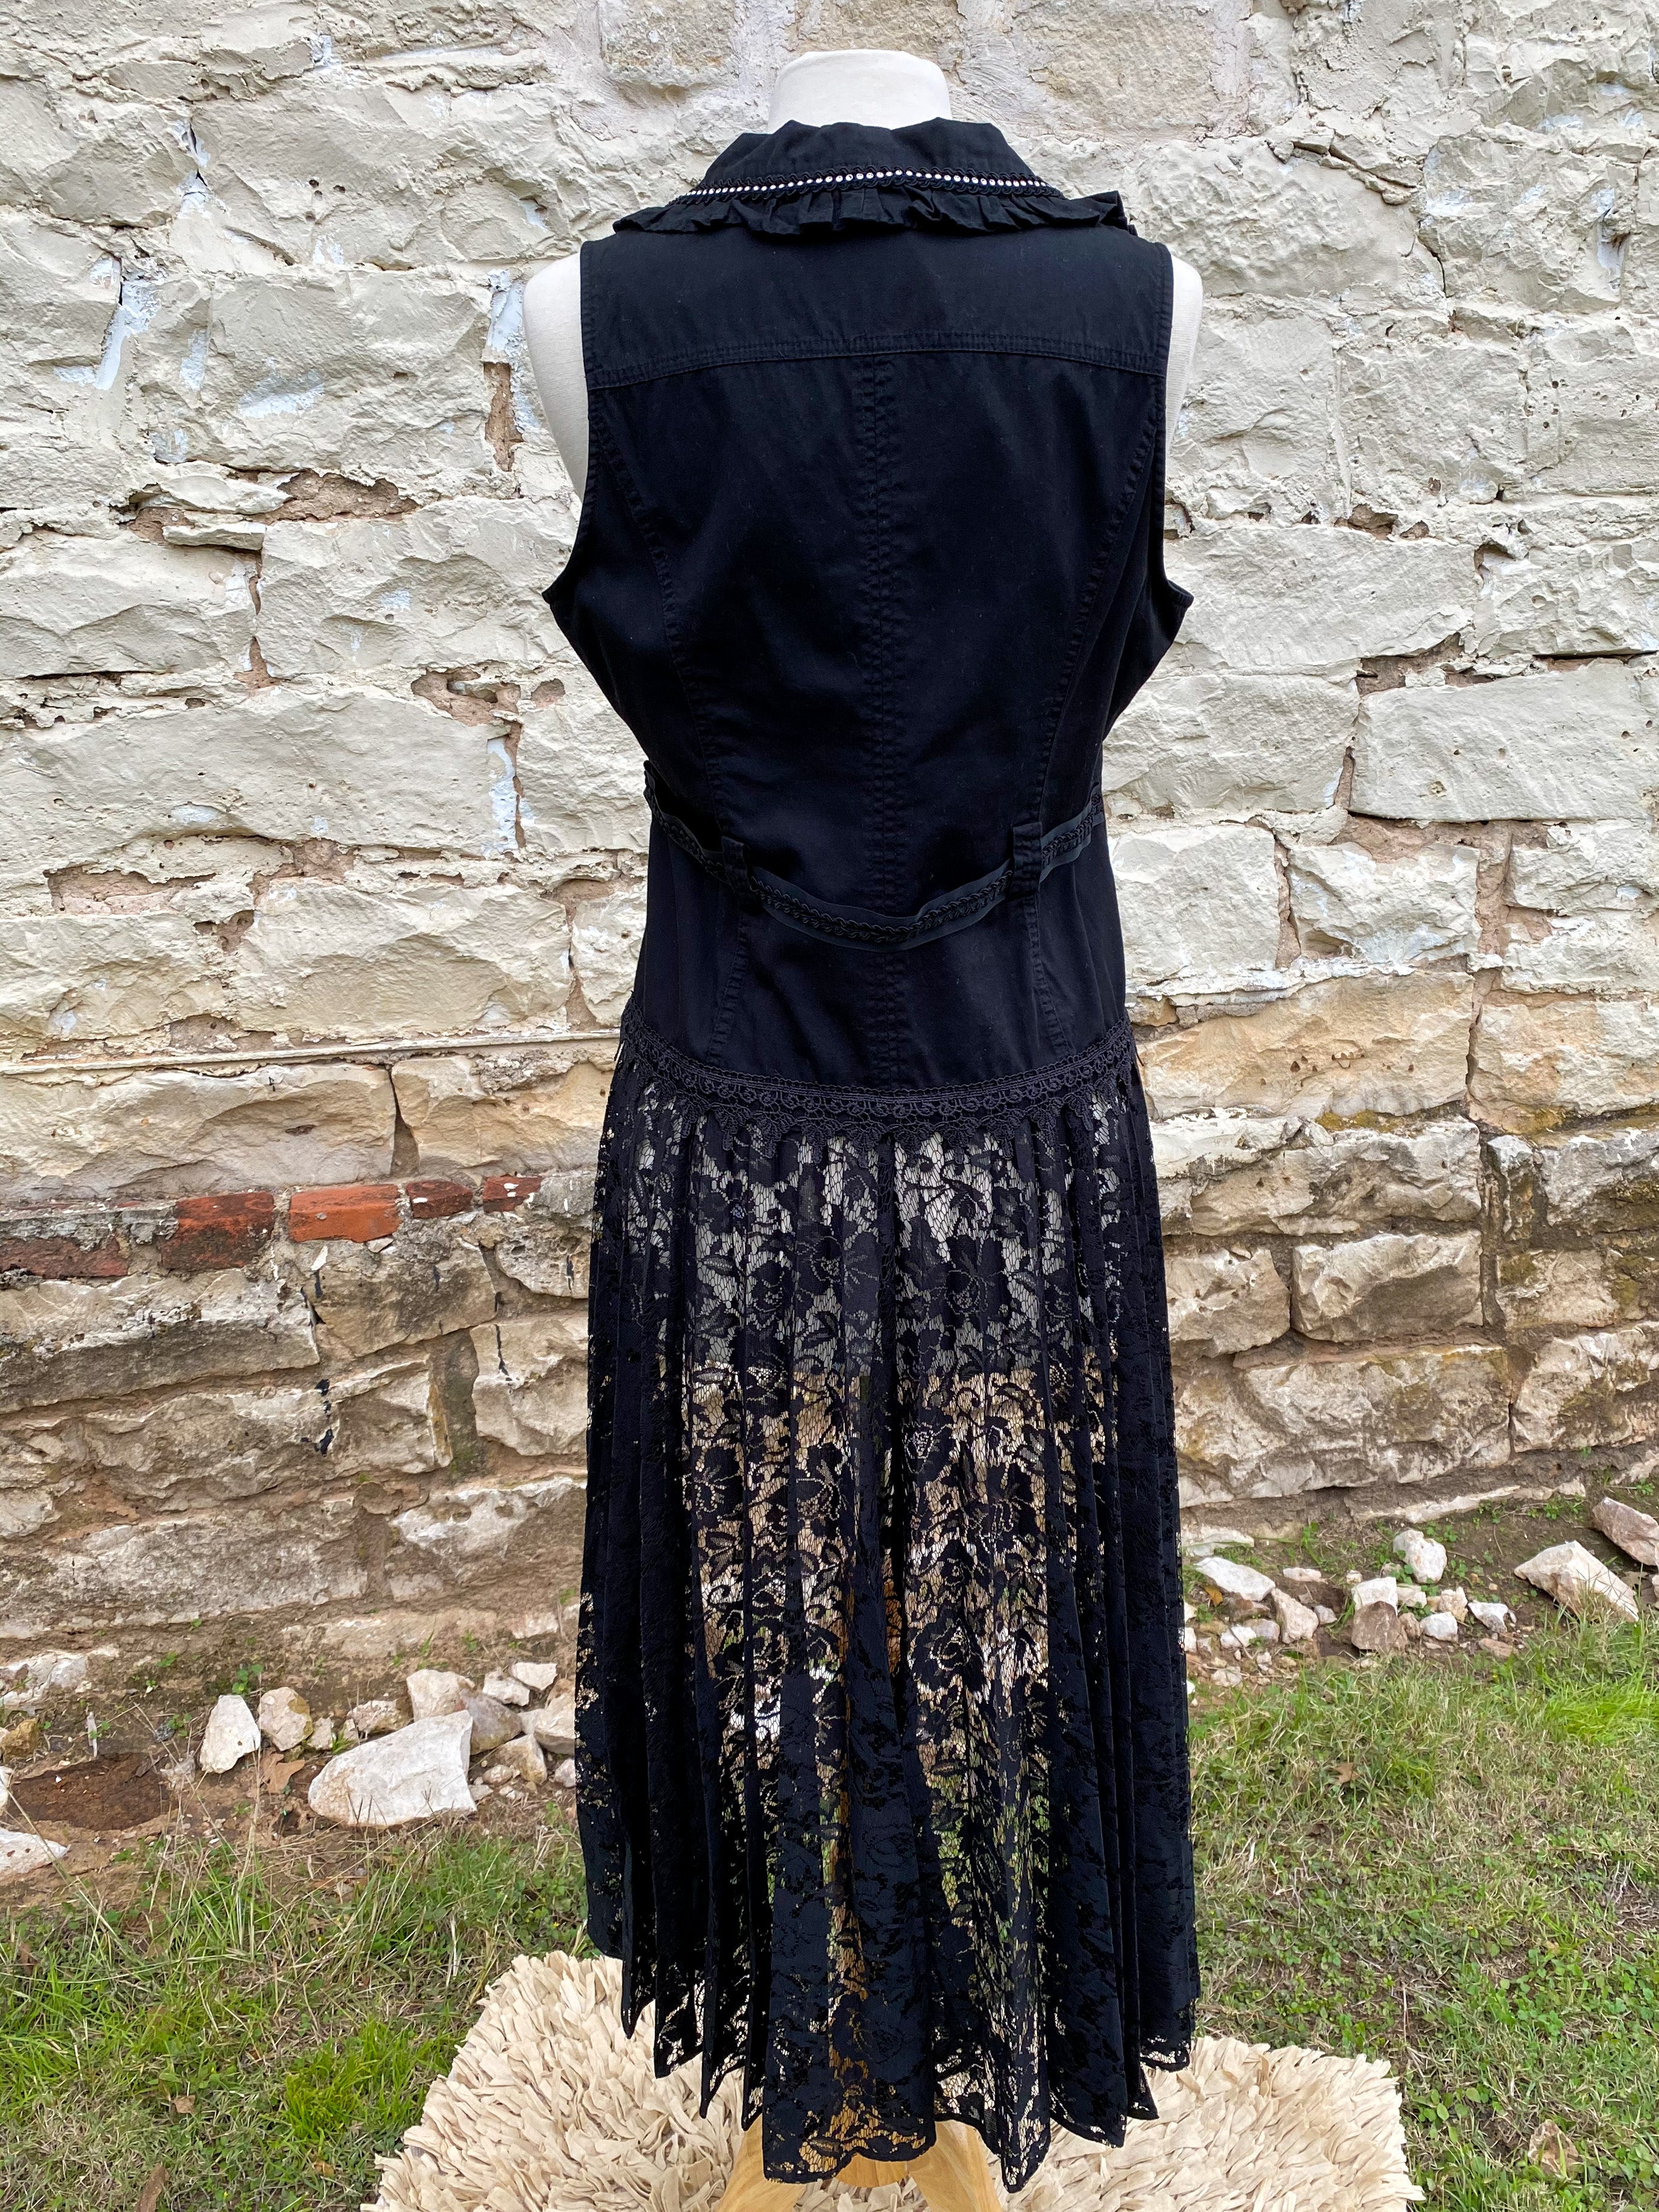 Black Vest with Crystal Collar and Long Black Lace Skirt - Medium